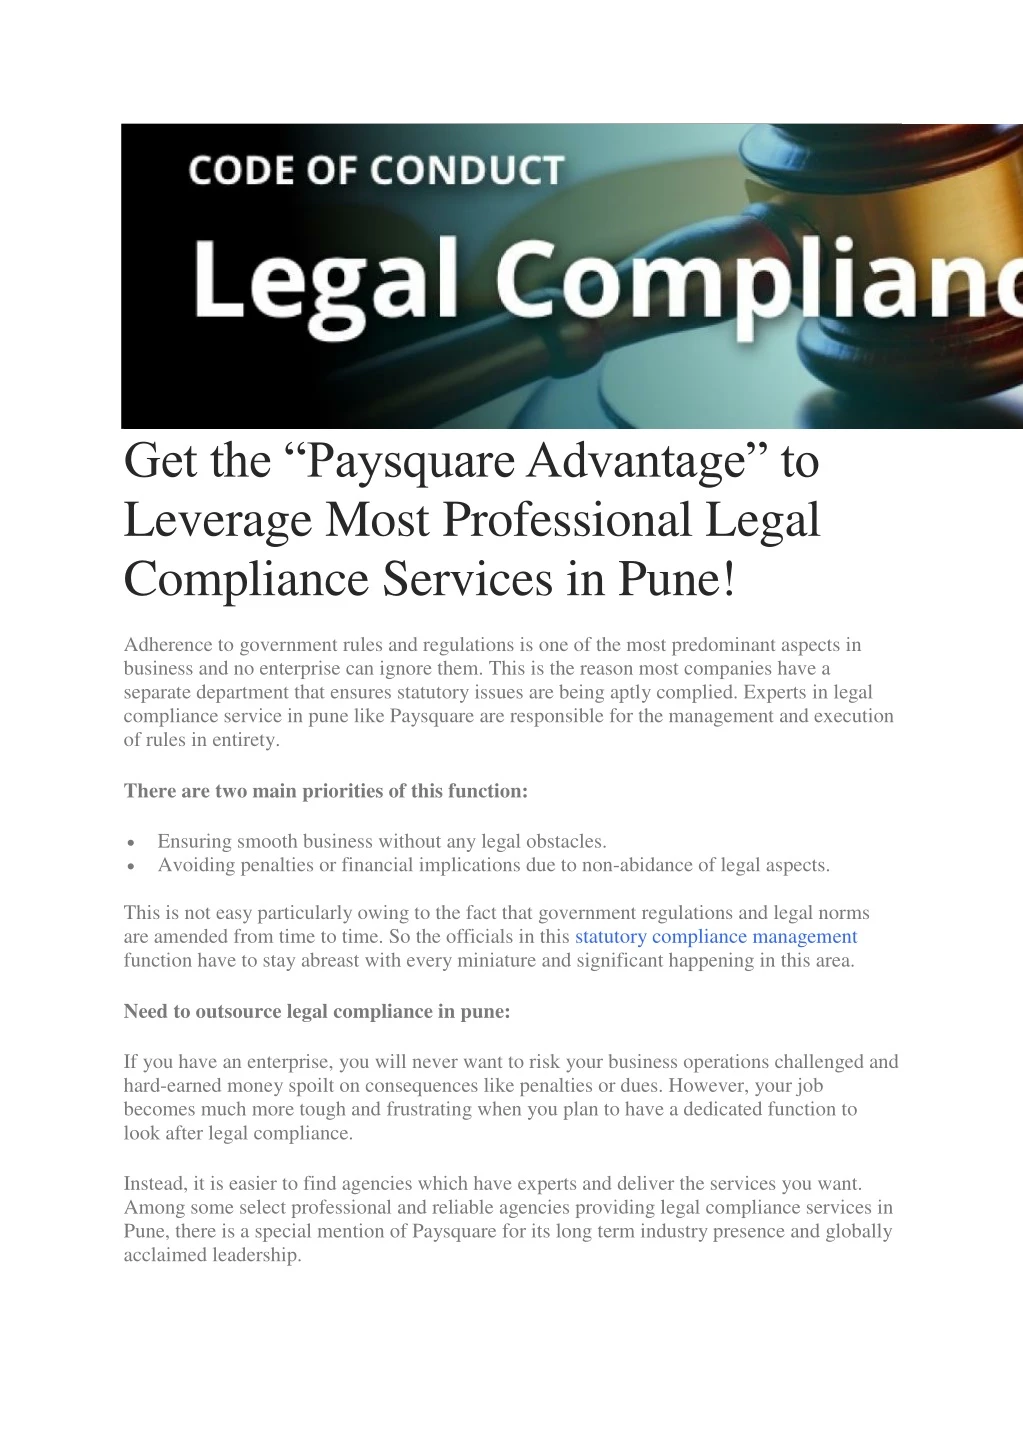 get the paysquare advantage to leverage most